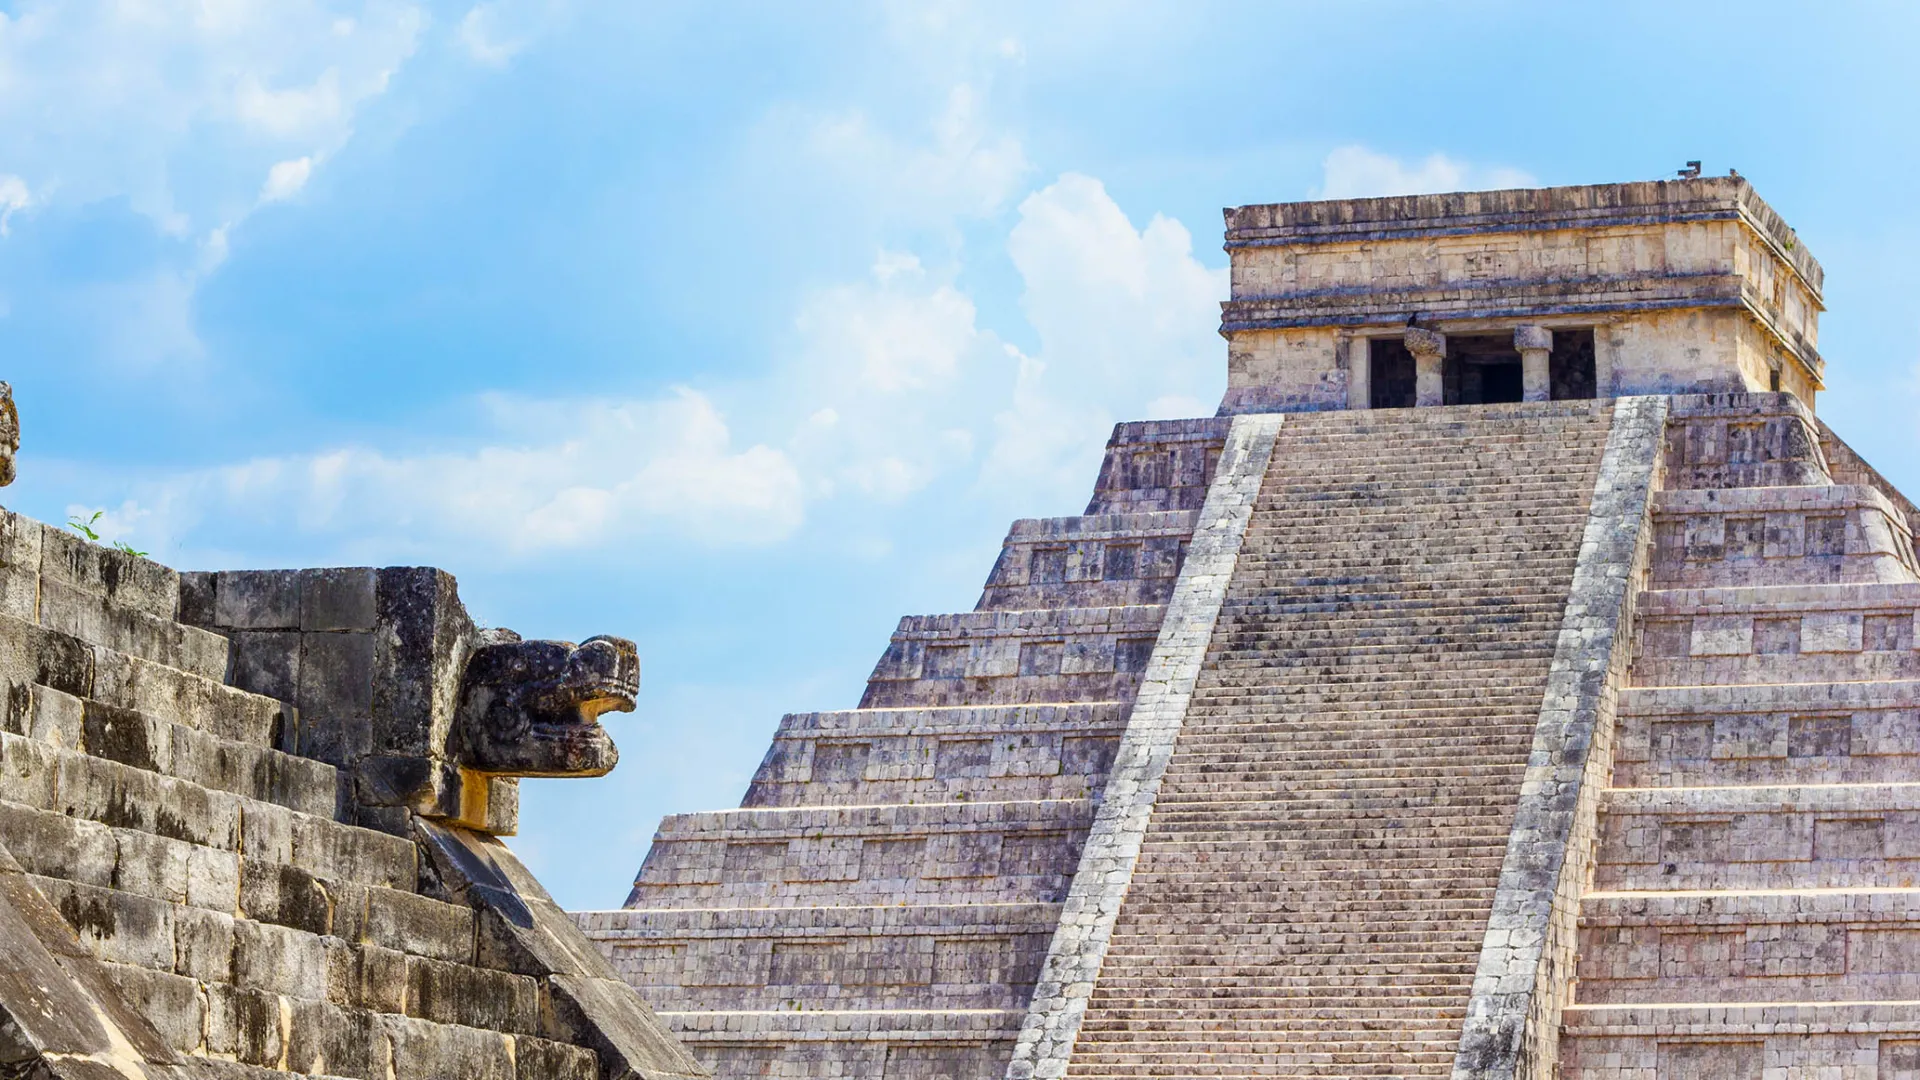 A Mesoamerican pyramid in Chichen Itza, Mexico. CSUSB will host the 2023 Spring Meeting of the Southern California Mesoamerica Network.